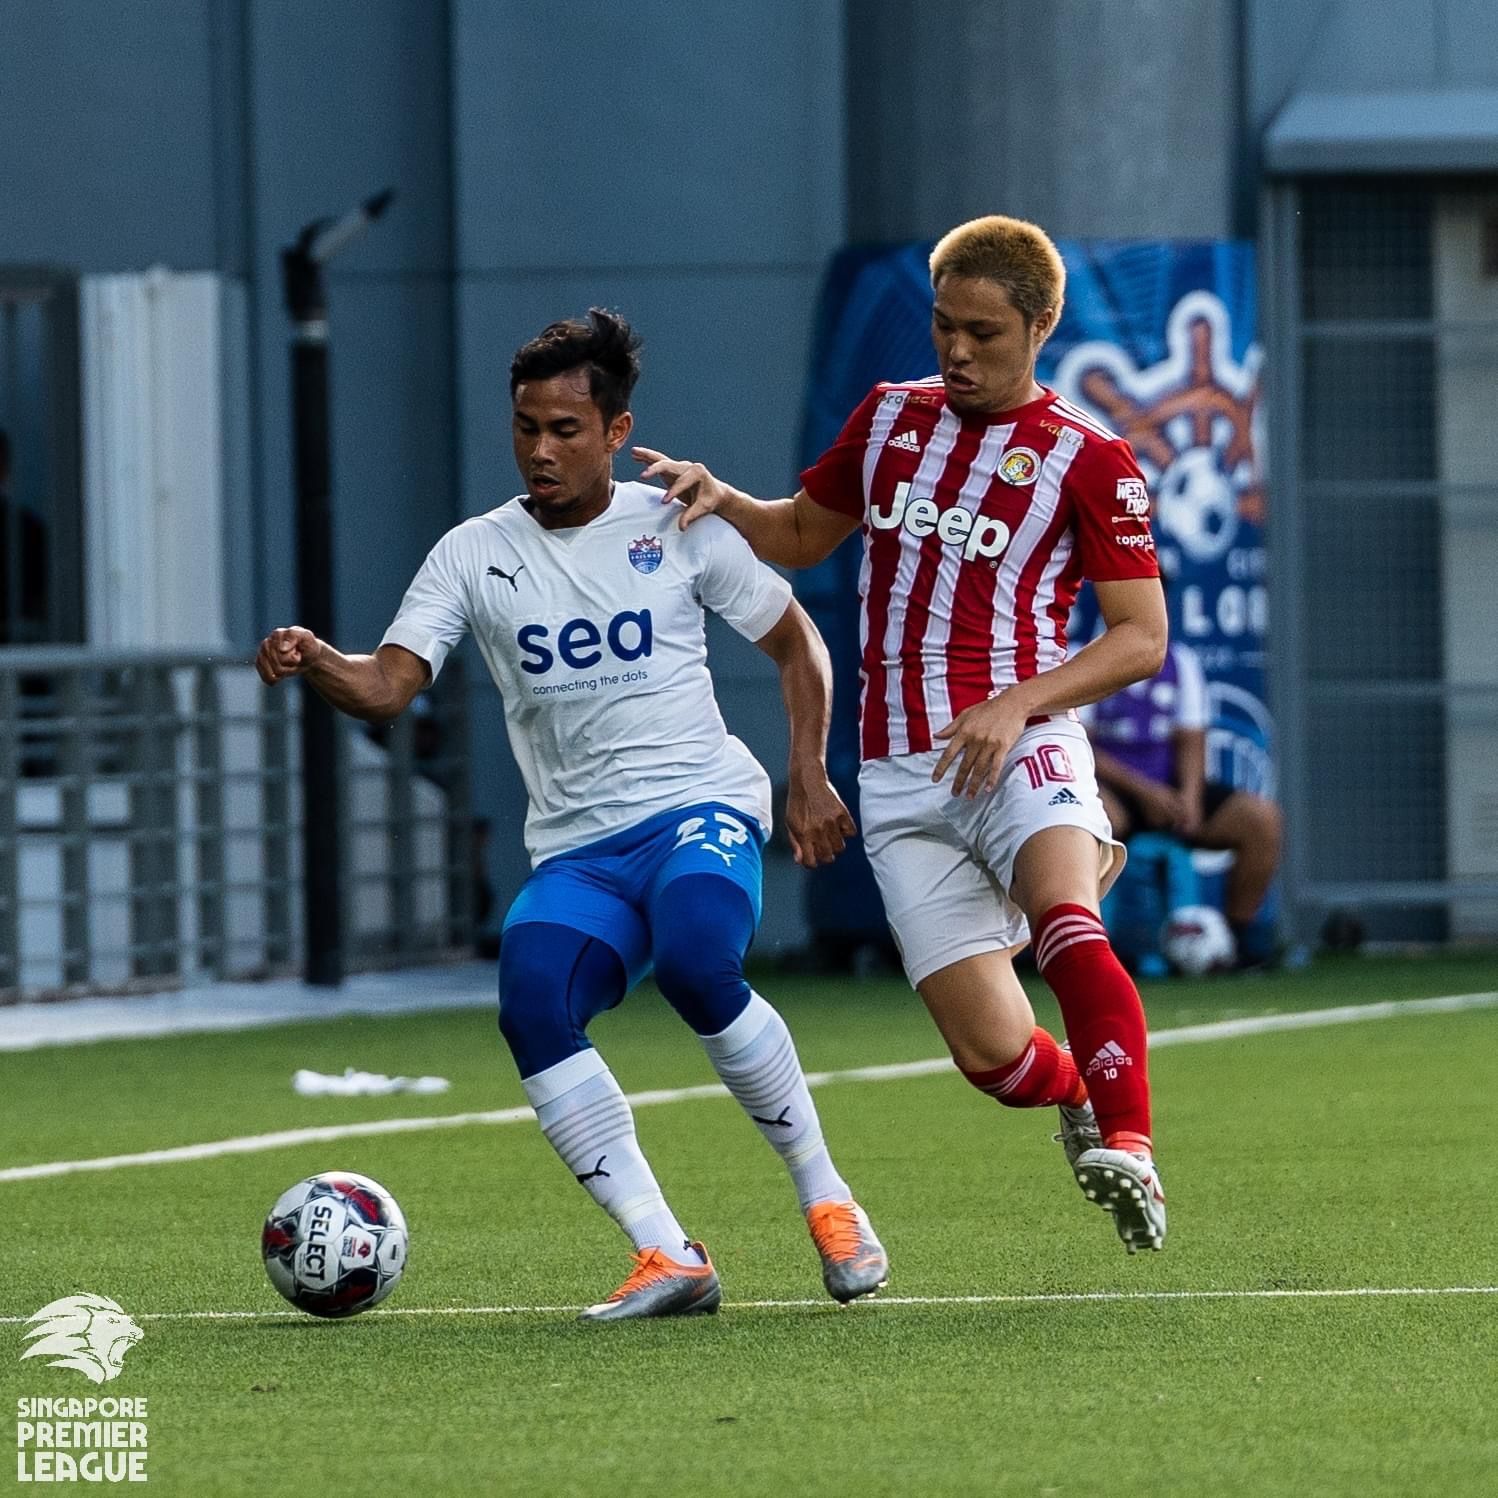 Tampines Rovers vs Lion City Predictions, Betting Tips & Odds | 10 SEPTEMBER, 2022